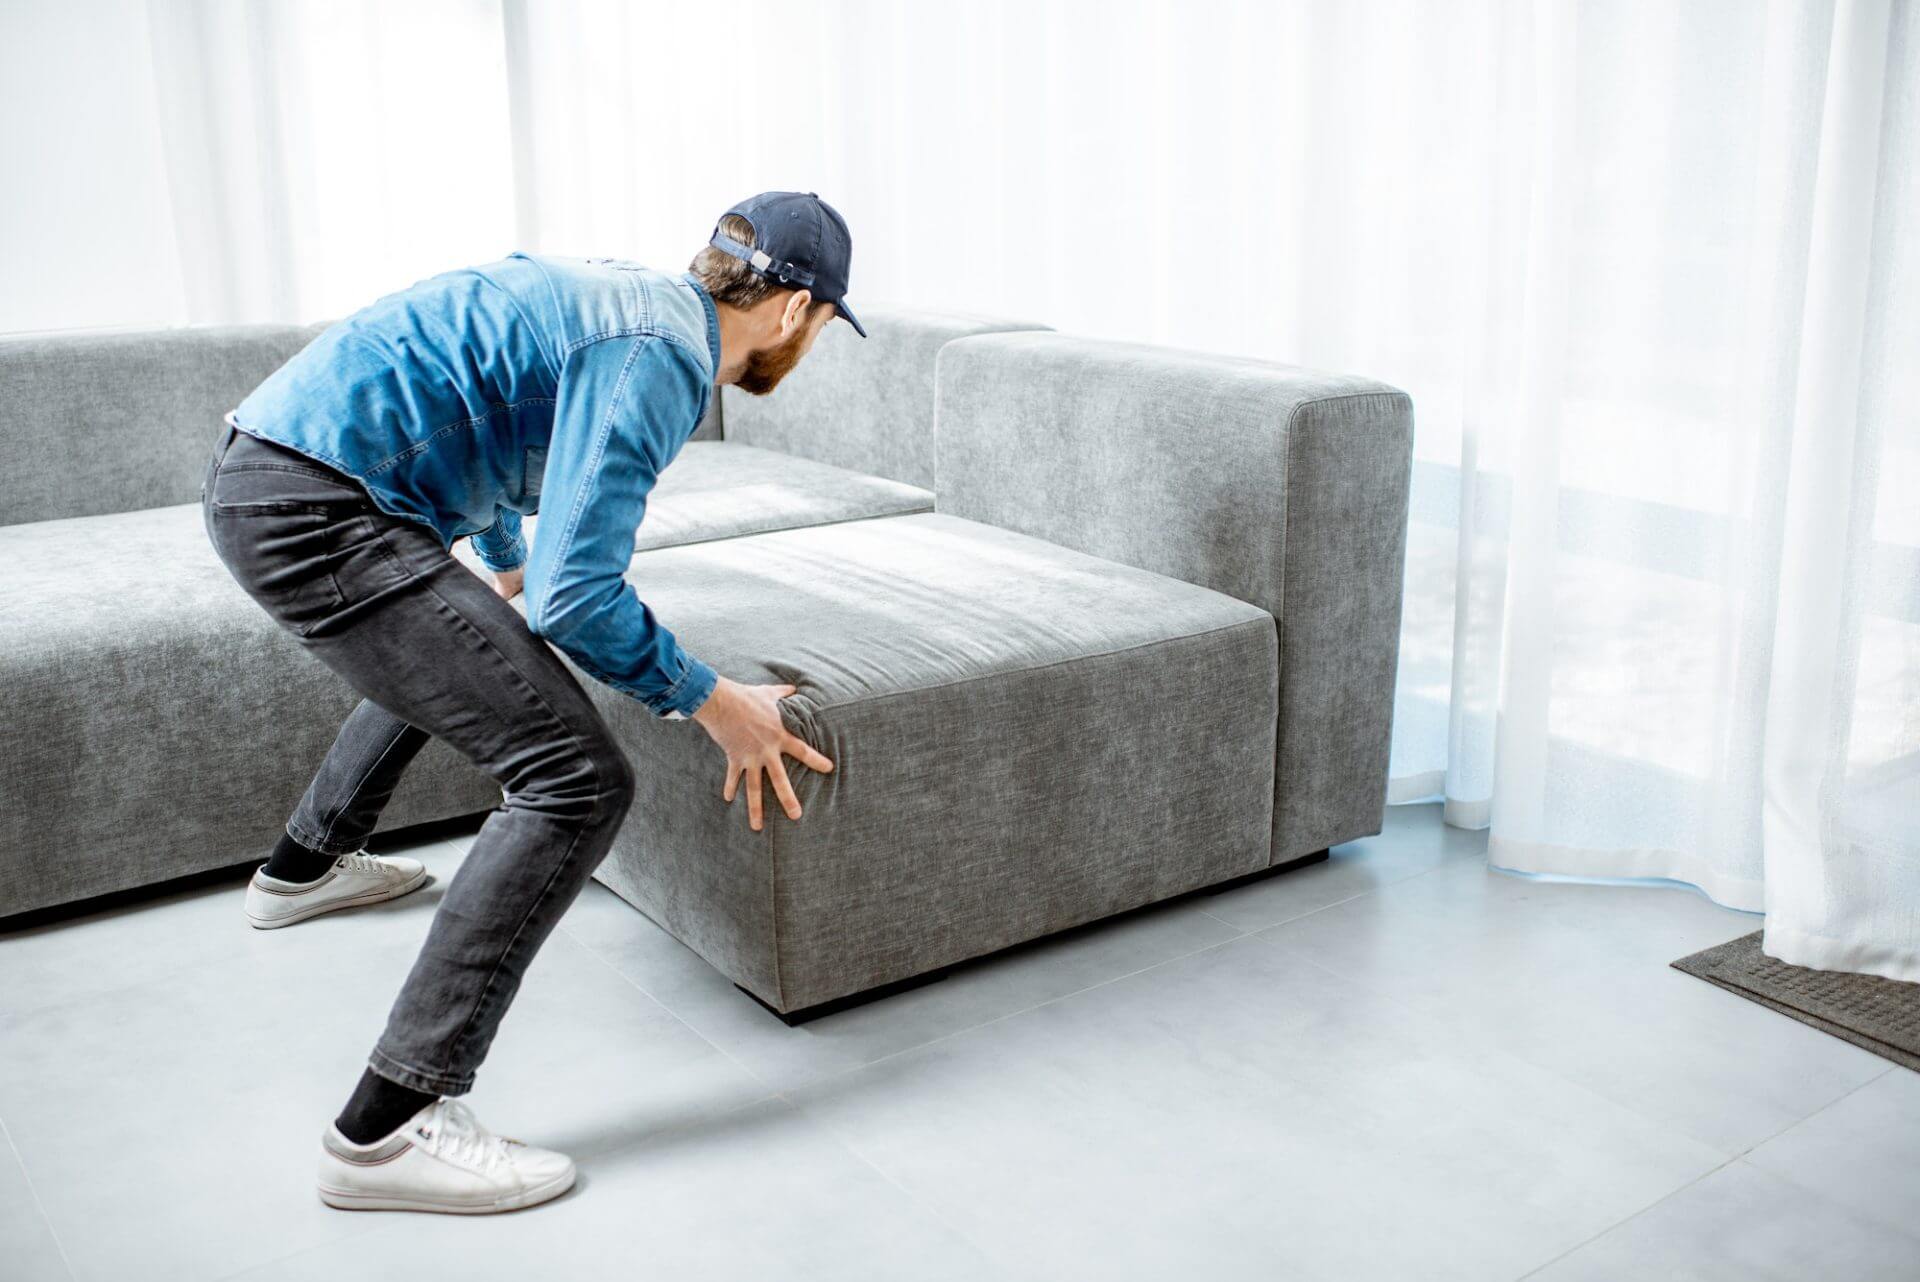 Man mounting couch in the apartment